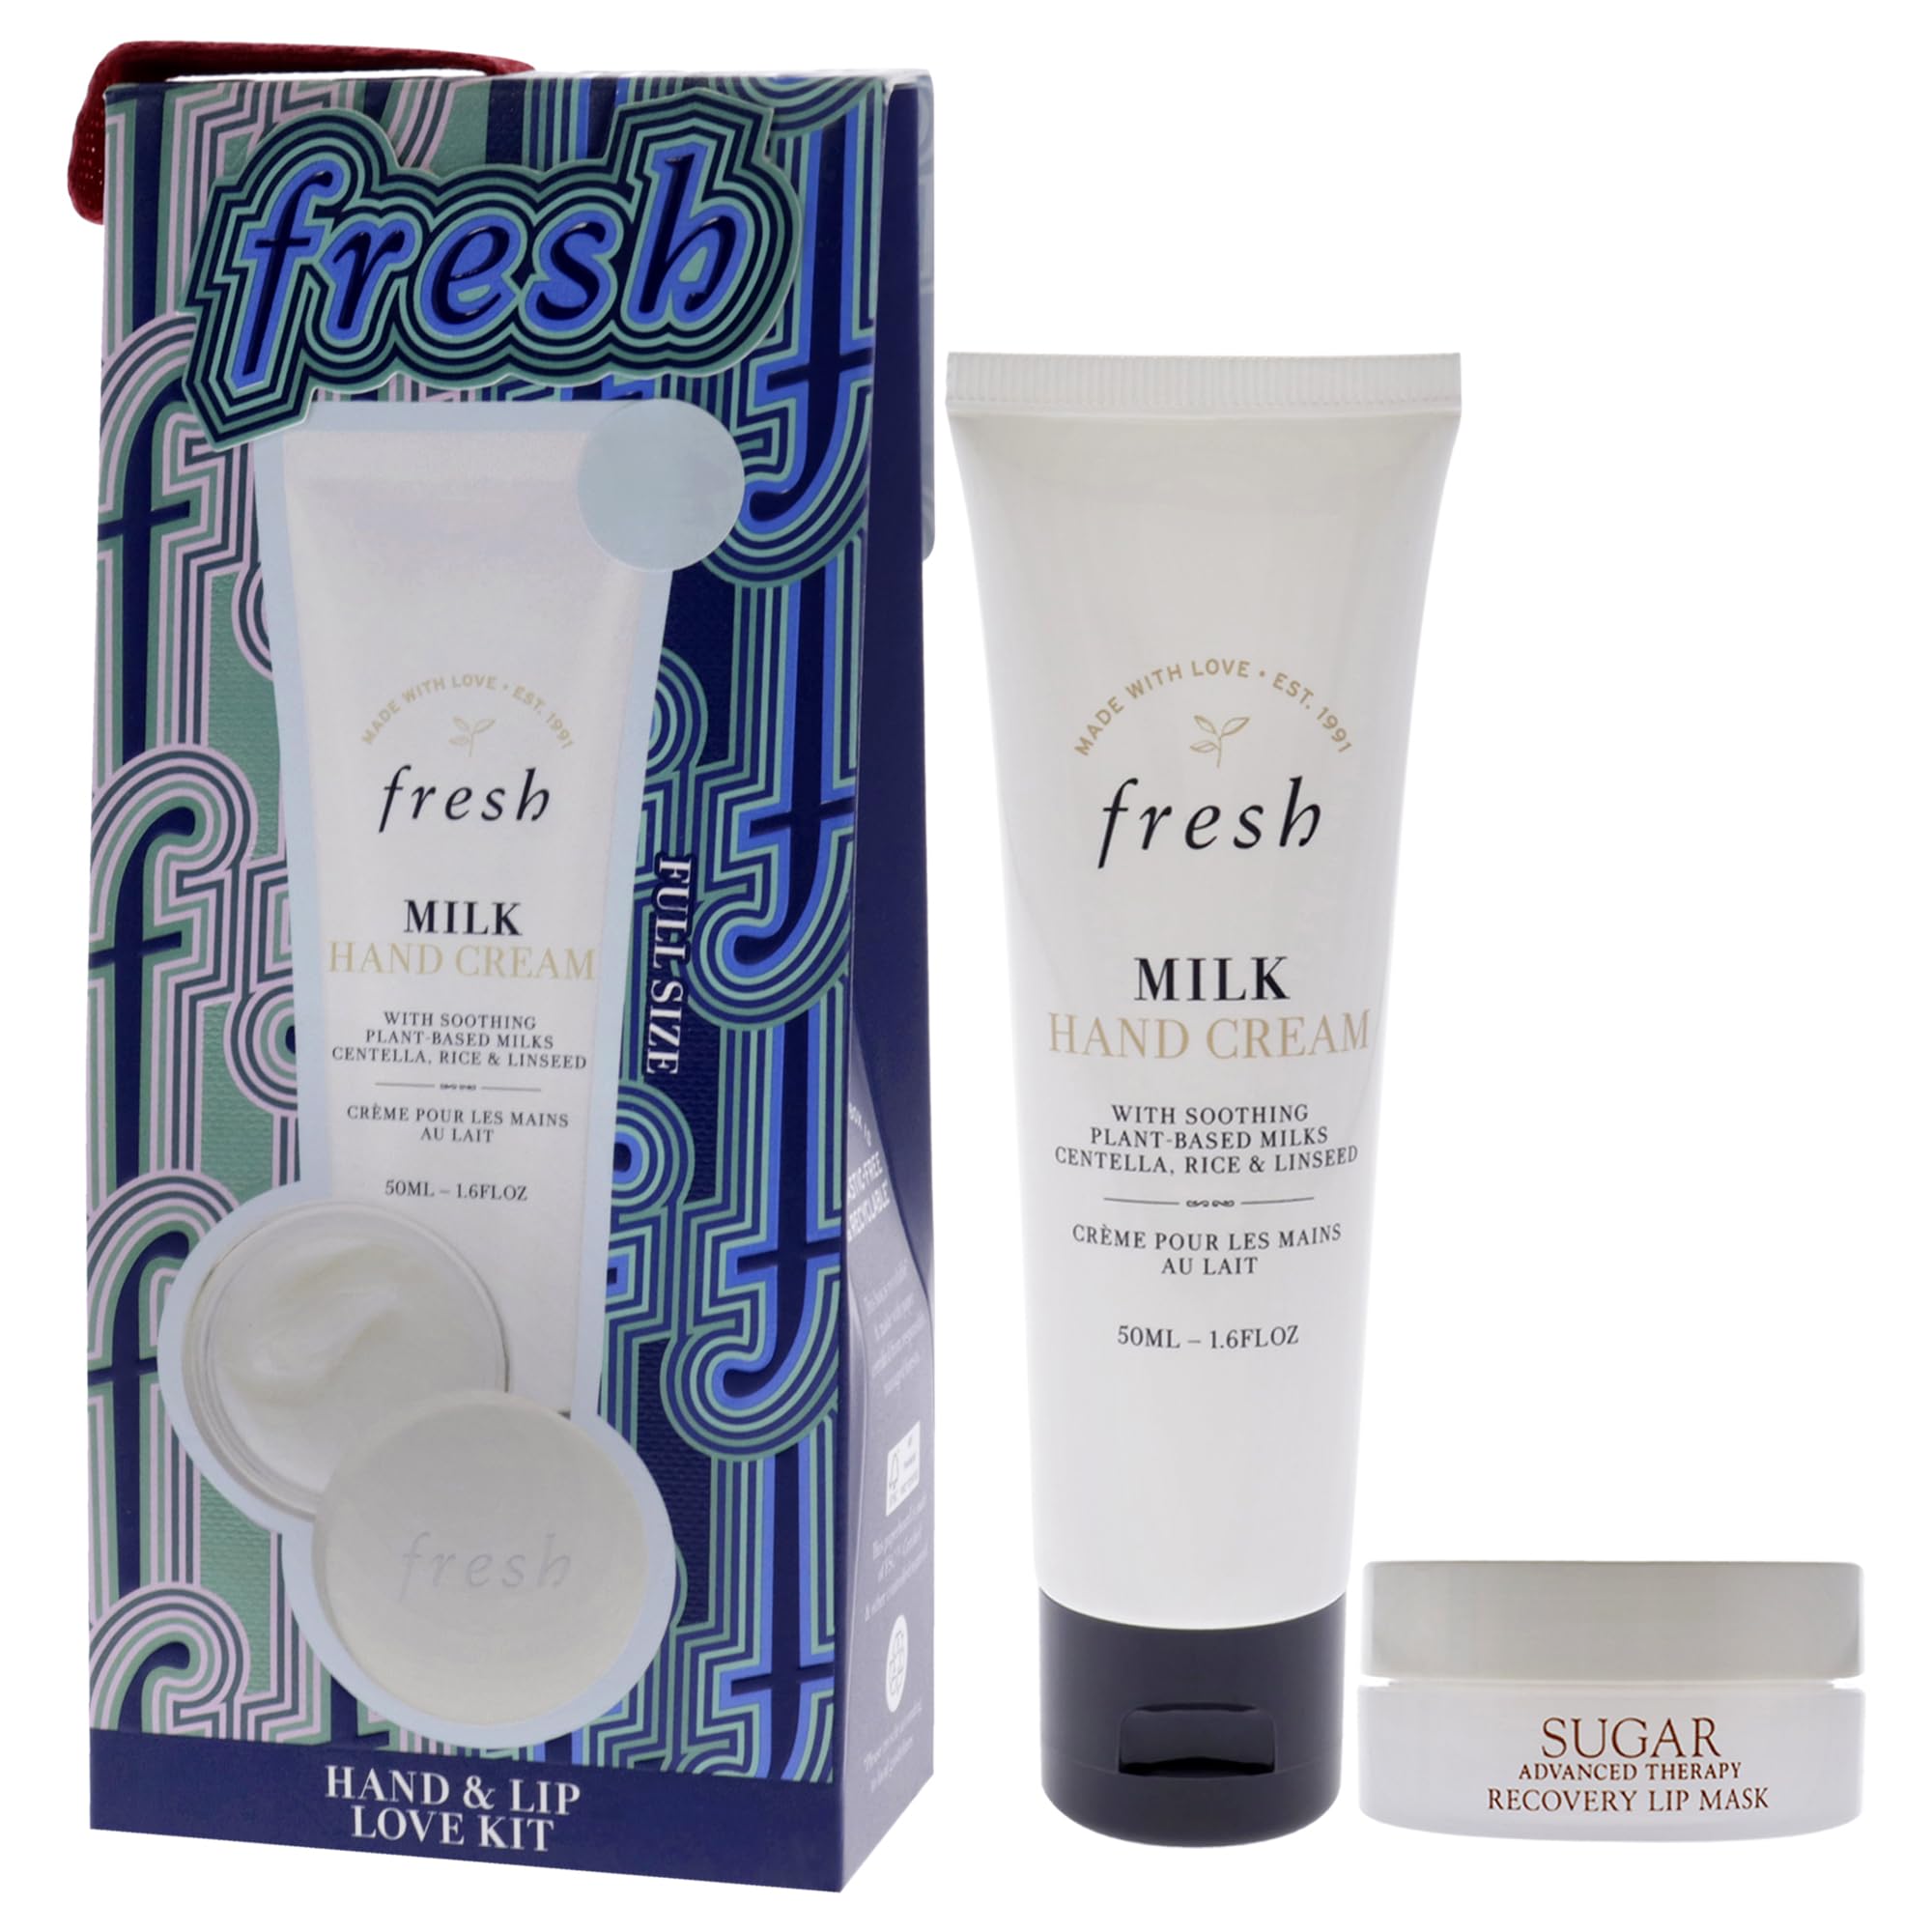 Fresh Hand And Lip Love Kit for Women - 2 Pc 1.6oz Milk Intensive Hand Cream, 0.3oz Sugar Recovery Lip Mask Advanced Therapy